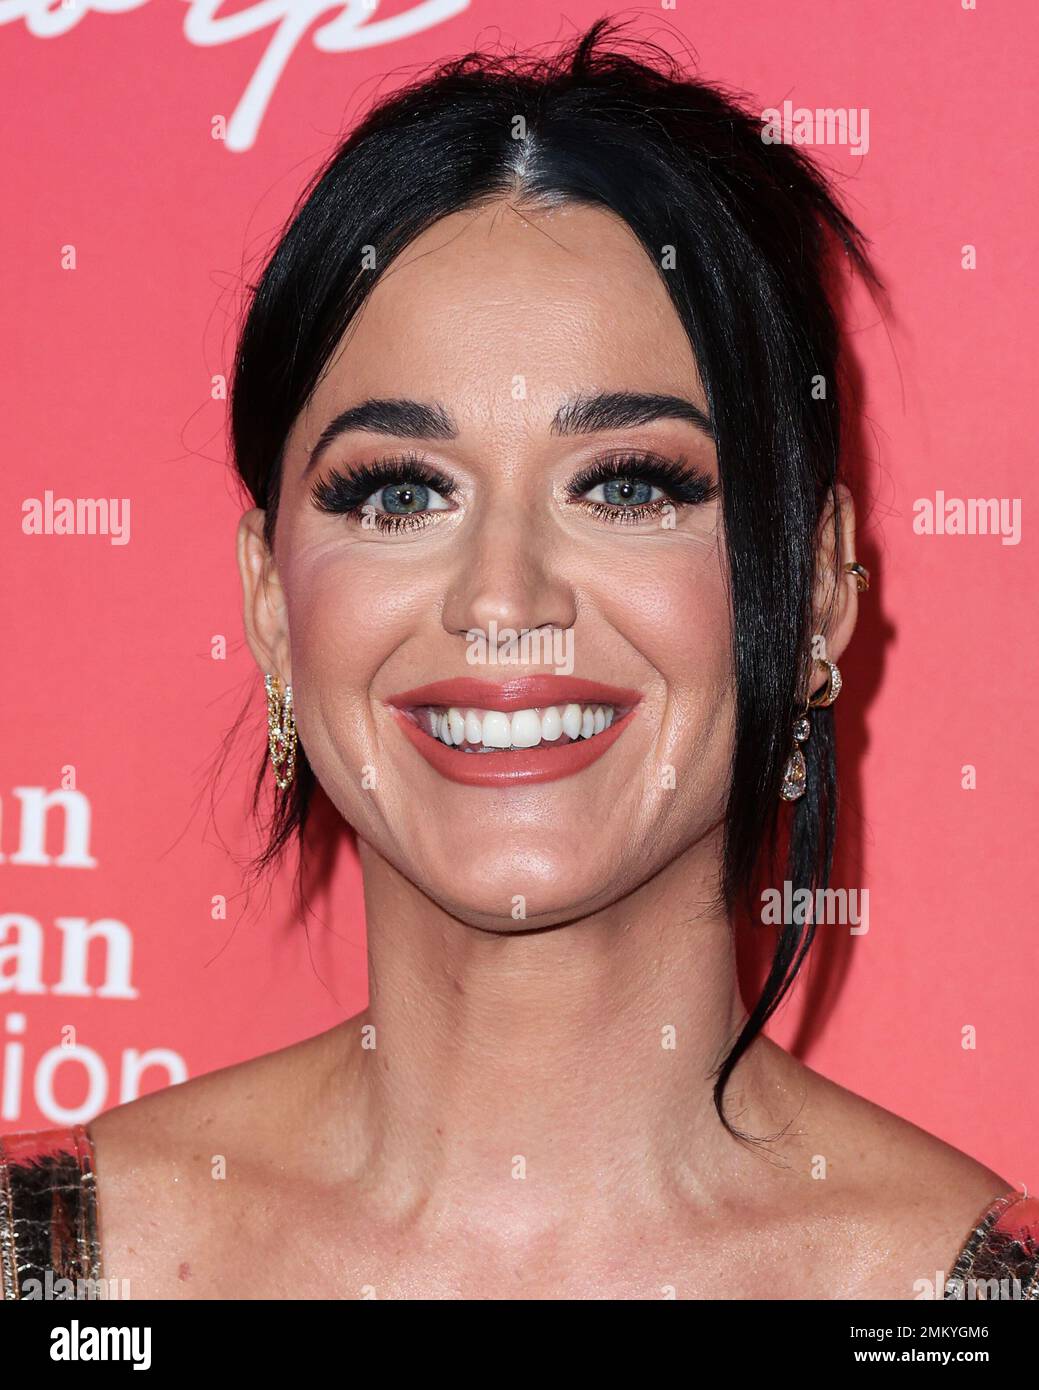 Los Angeles California Usa January 28 American Singer Songwriter Katy Perry Arrives At The Gday Usa Arts Gala 2023 Held At The Skirball Cultural Center On January 28 2023 In Los Angeles California United States Photo By Xavier Collinimage Press Agency 2MKYGM6 